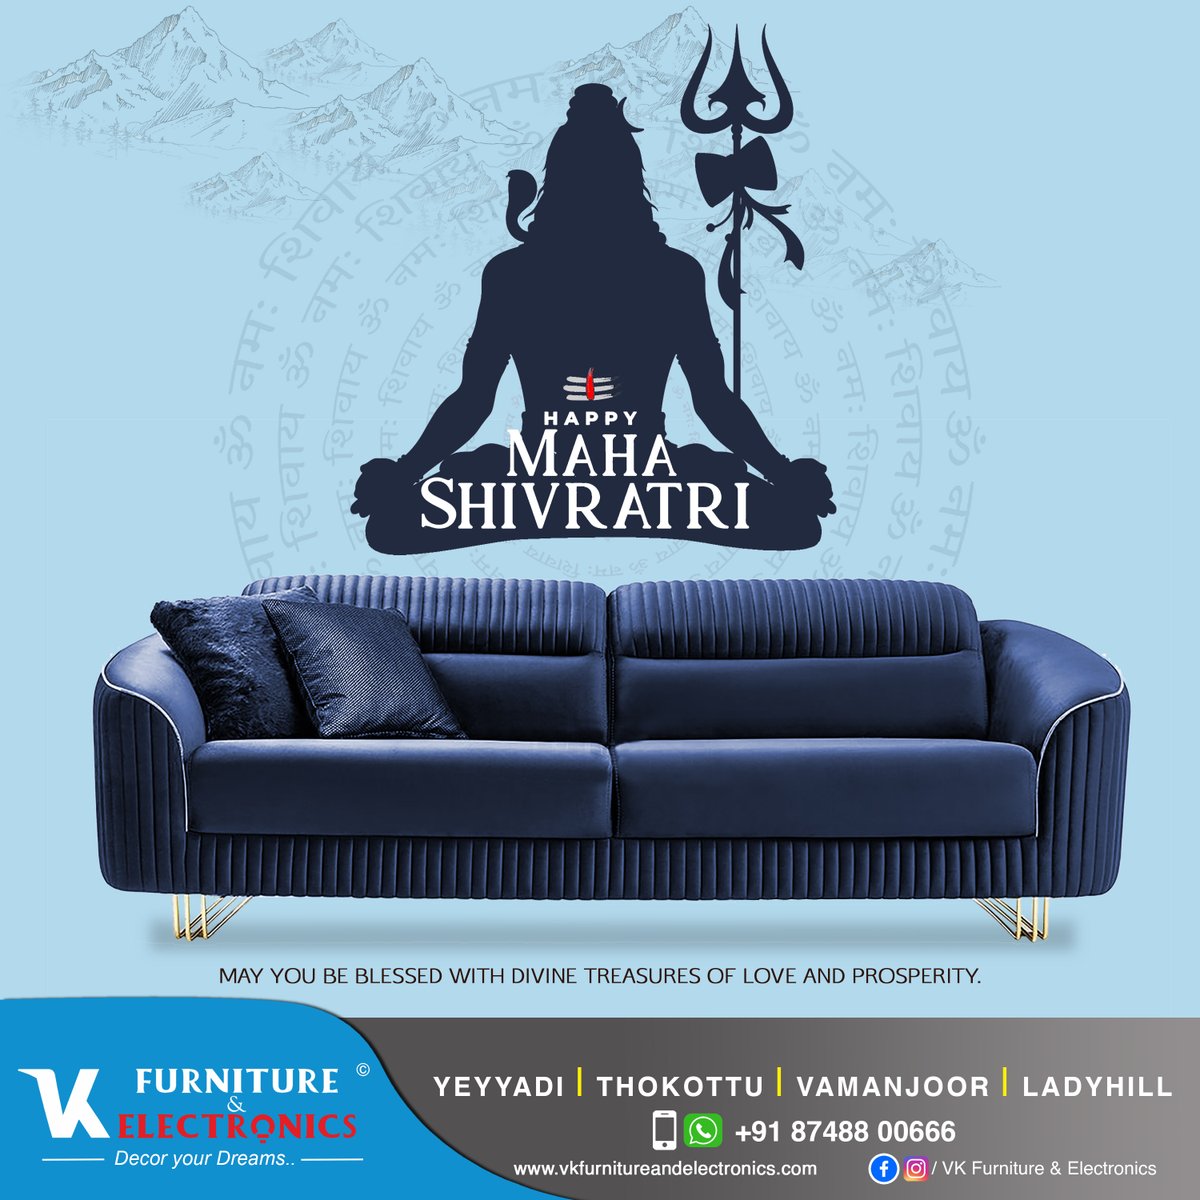 'On this Mahashivratri, may Lord Shiva bless you with peace, prosperity, and happiness. Om Namah Shivaya!' 'May the blessings of Lord Shiva be with you and your family on this holy night of Mahashivratri. Happy Mahashivratri!'

#vkfurnitureandelectronics 
#vkcombooffer